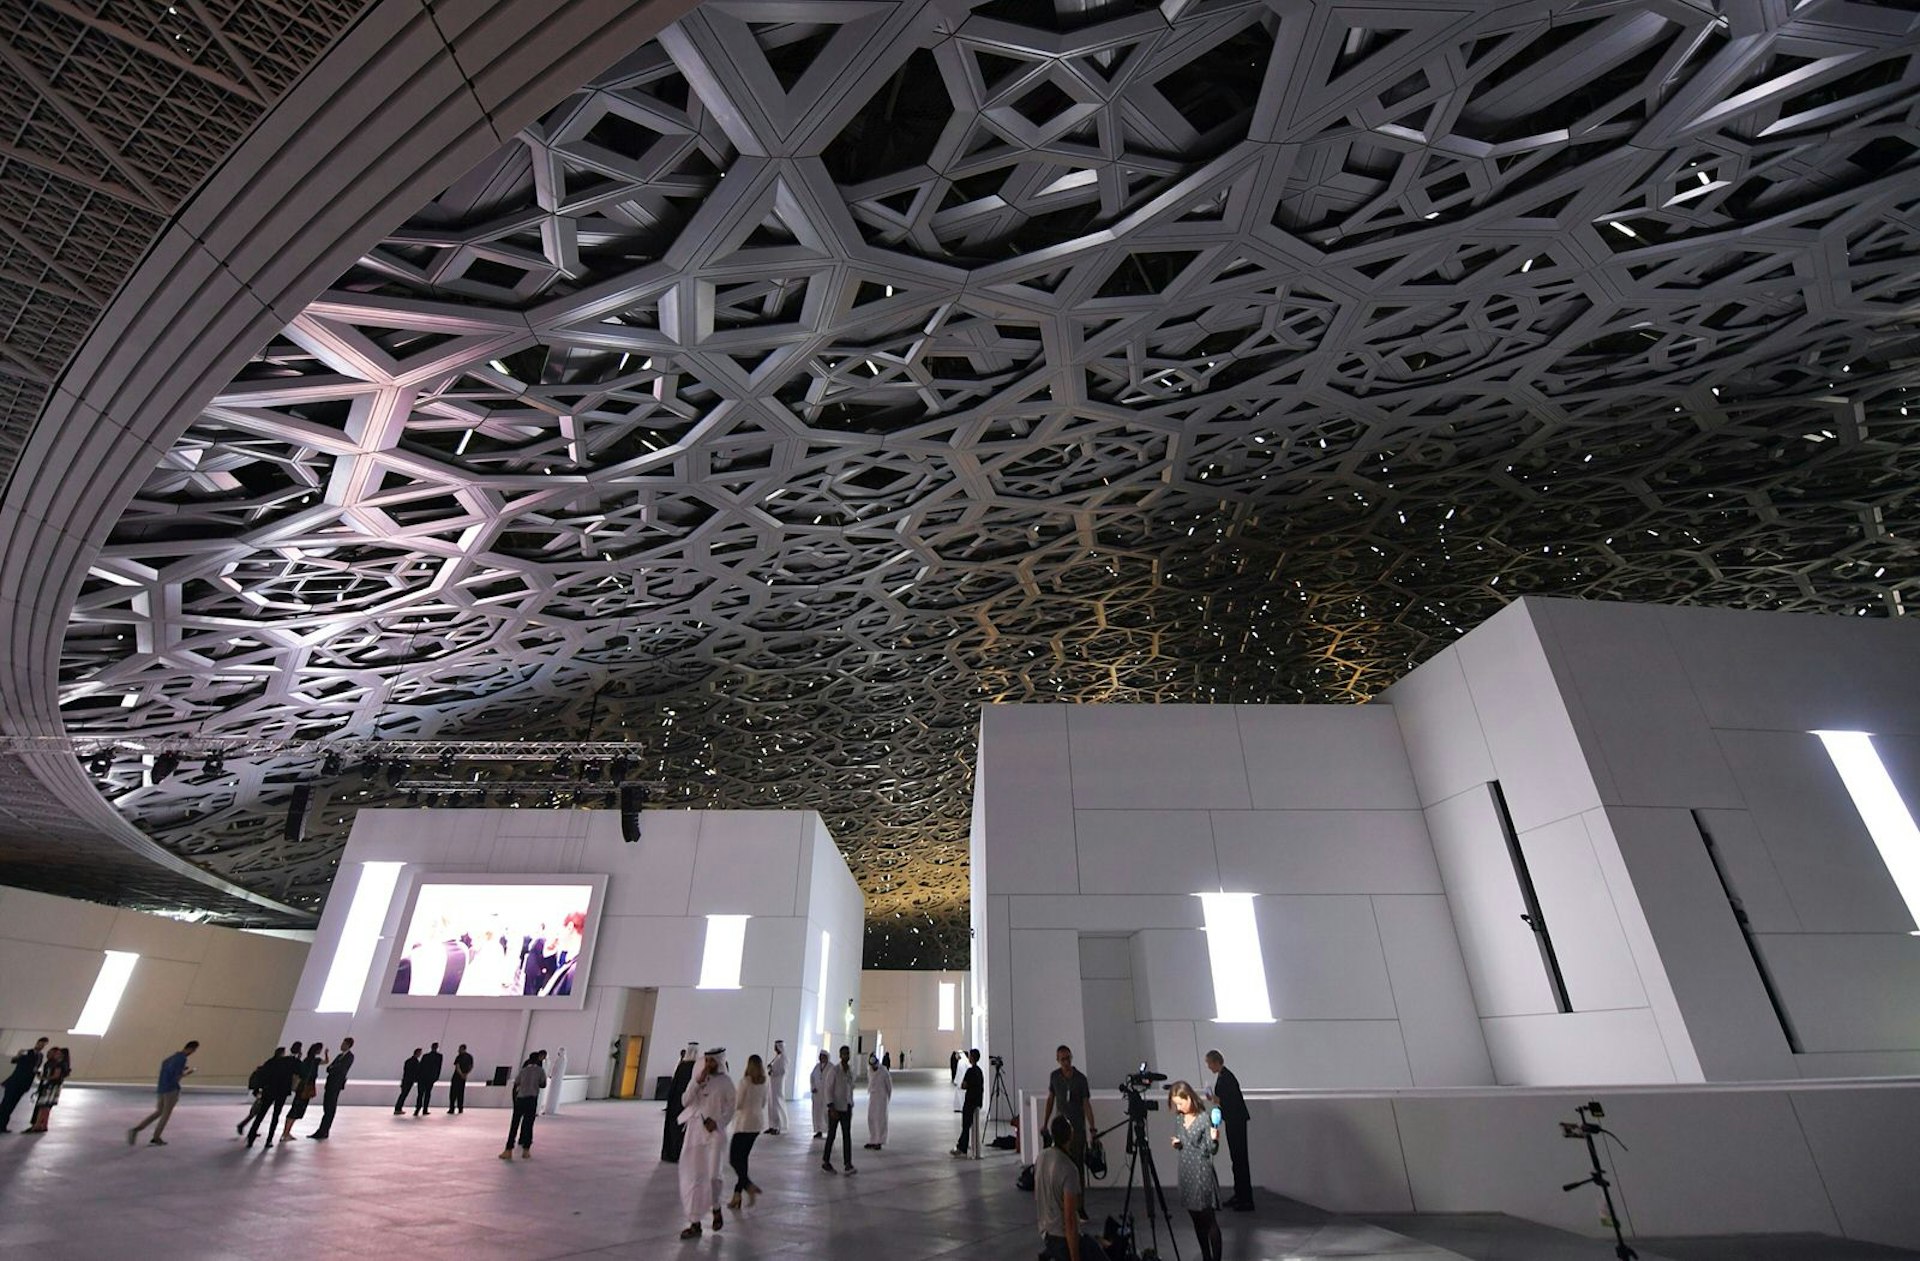 A general view shows people walking under the dome at the Louvre Abu Dhabi that was designed by French architect Jean Nouvel during its inauguration on November 8, 2017 on Saadiyat island in the Emirati capital. More than a decade in the making, the Louvre Abu Dhabi opened its doors, bringing the famed name to the Arab world for the first time. Image by Ludovic Marin / AFP / Getty Images